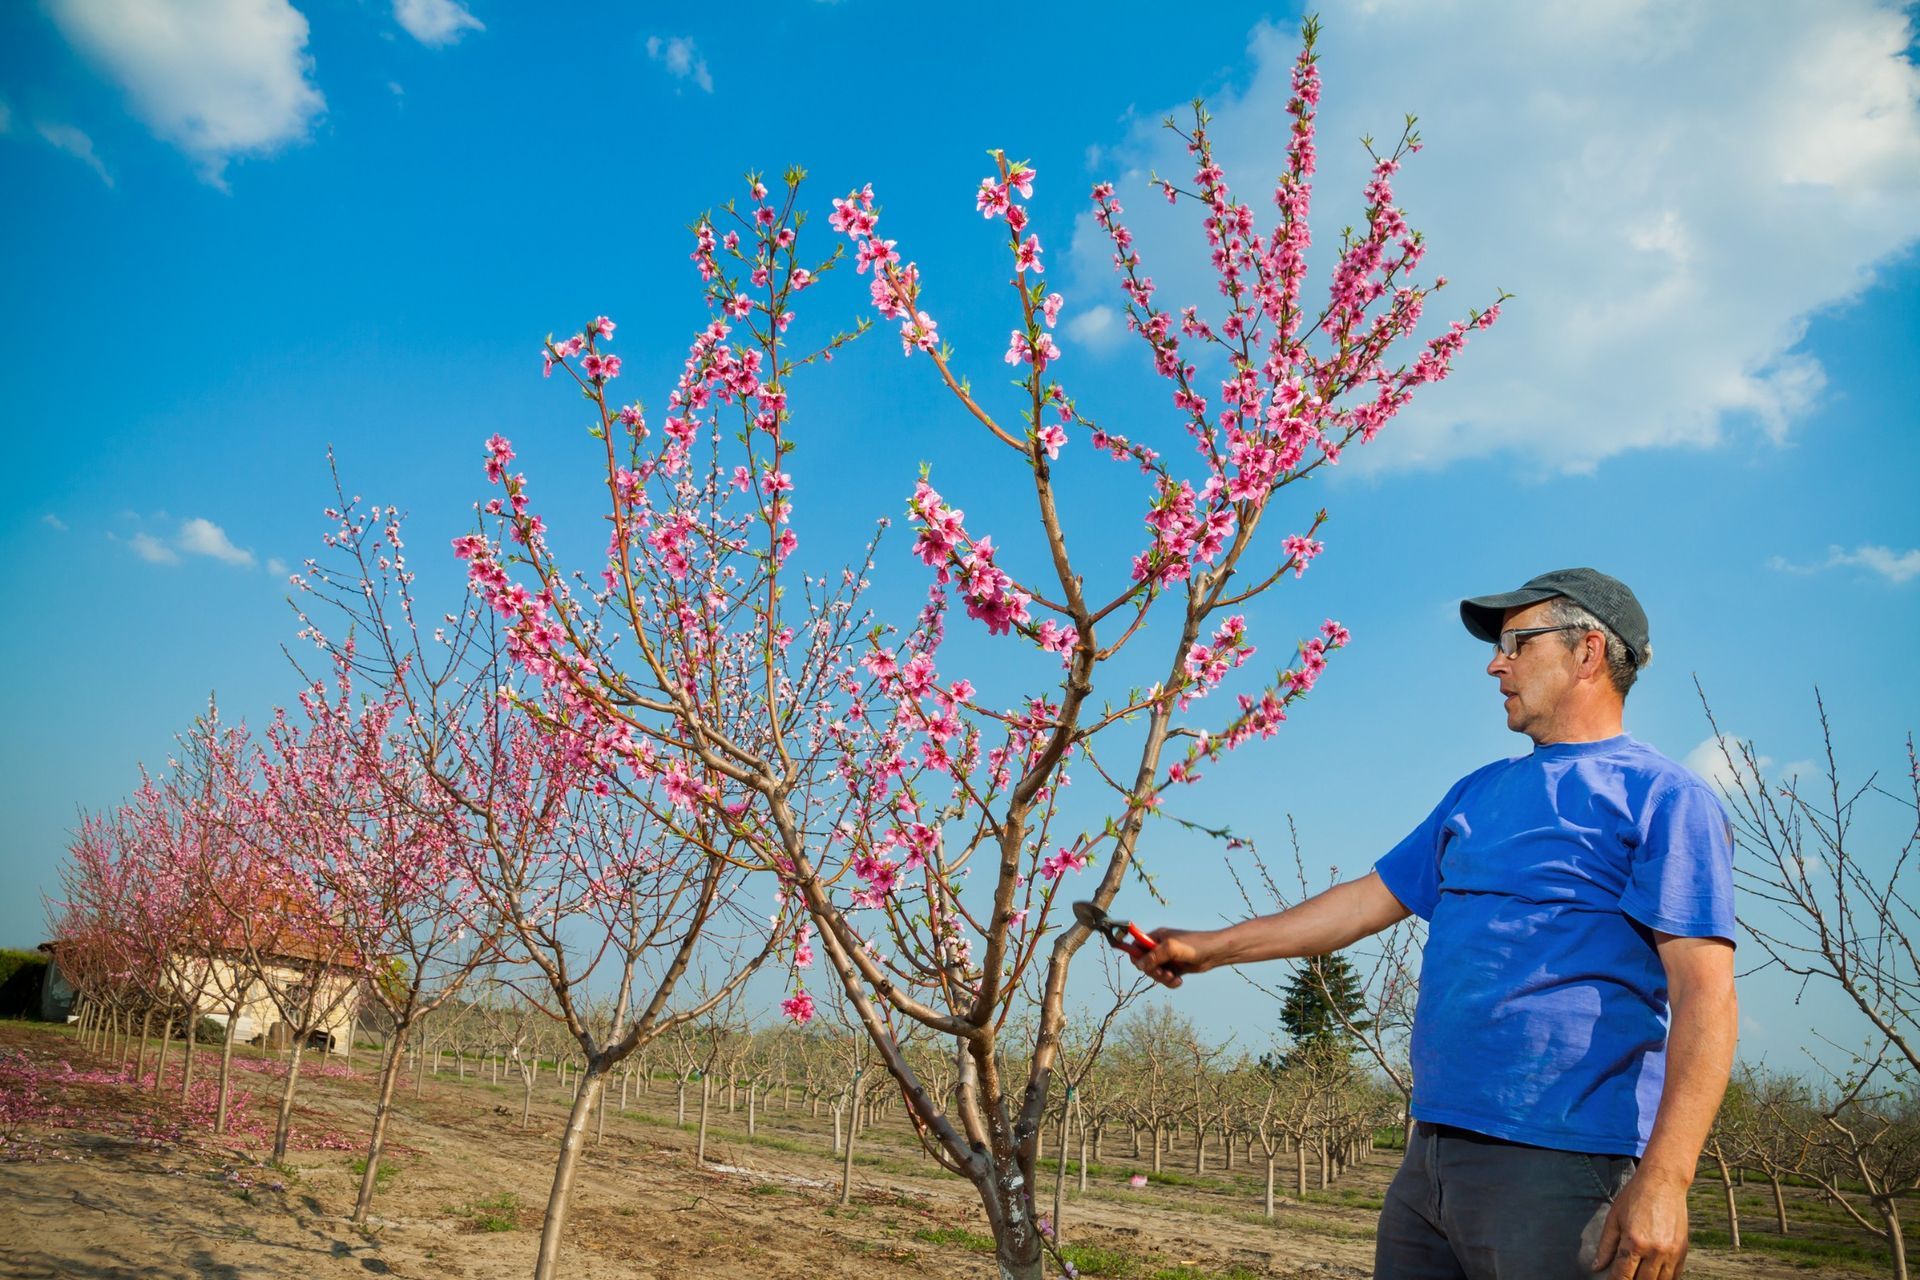 local arborist using a tried-and-tested technique to prune fruit trees